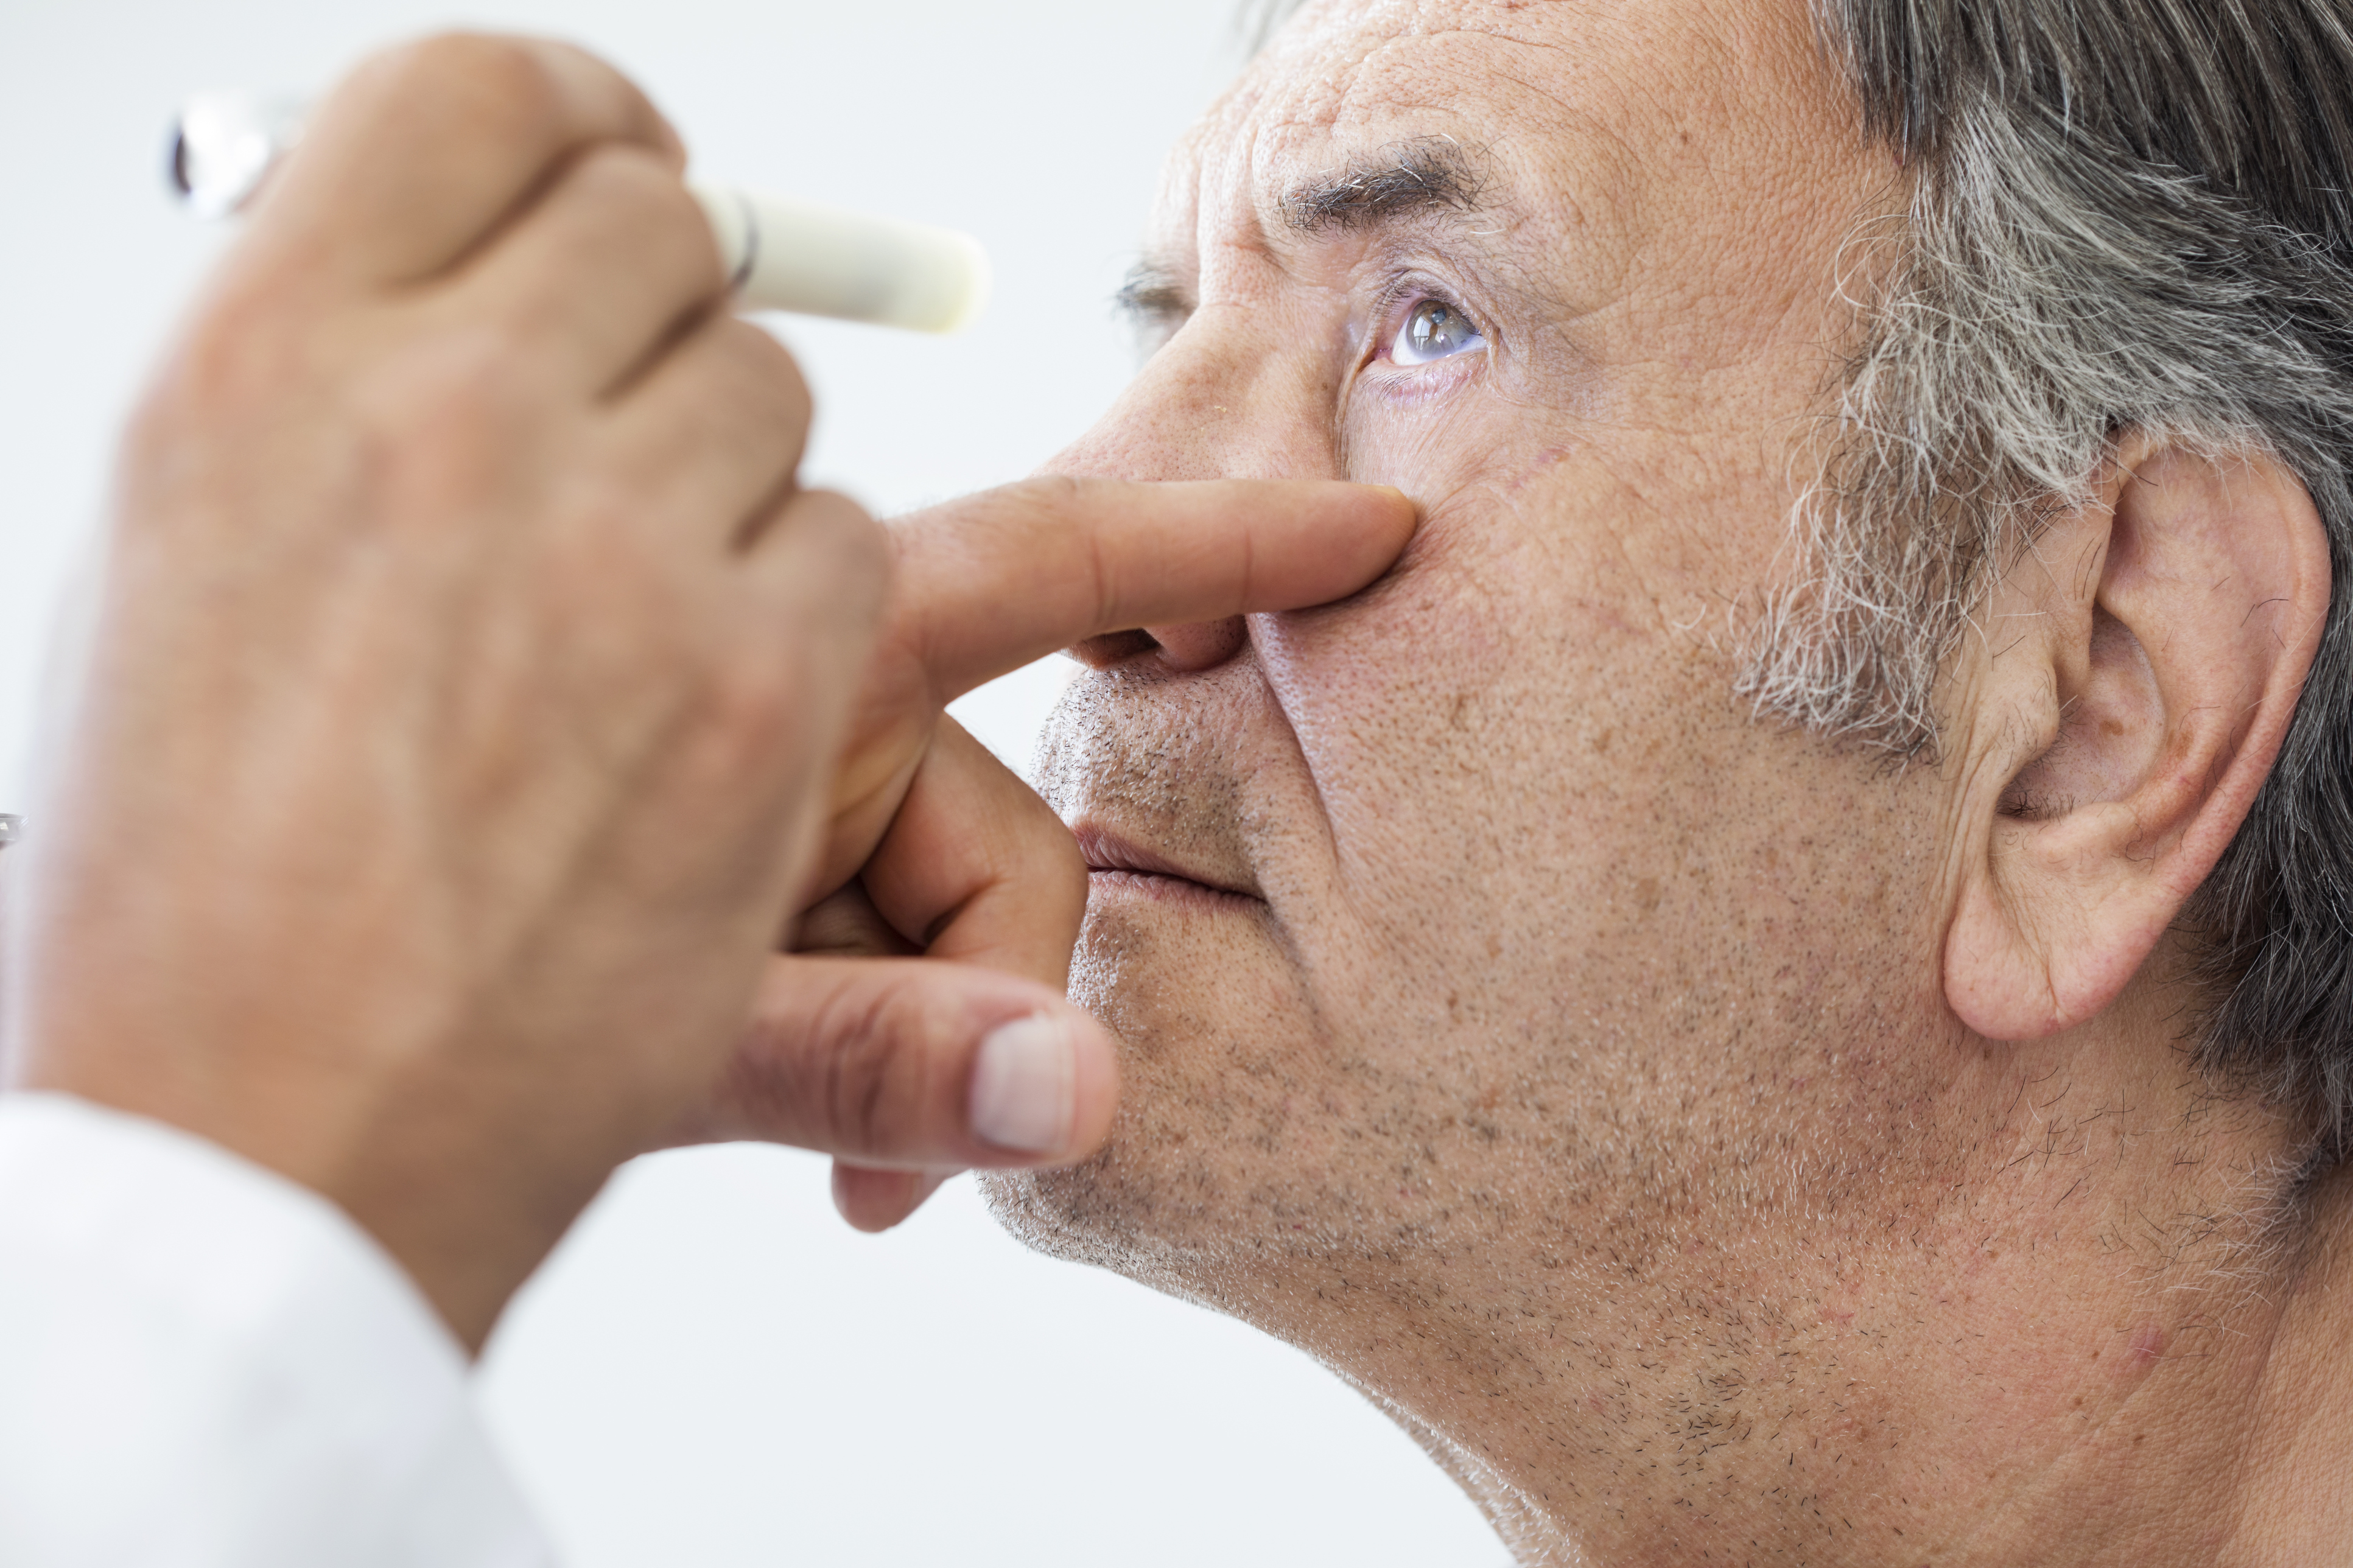 Elderly man examined by an ophthalmologist (Thinkstock/PA)